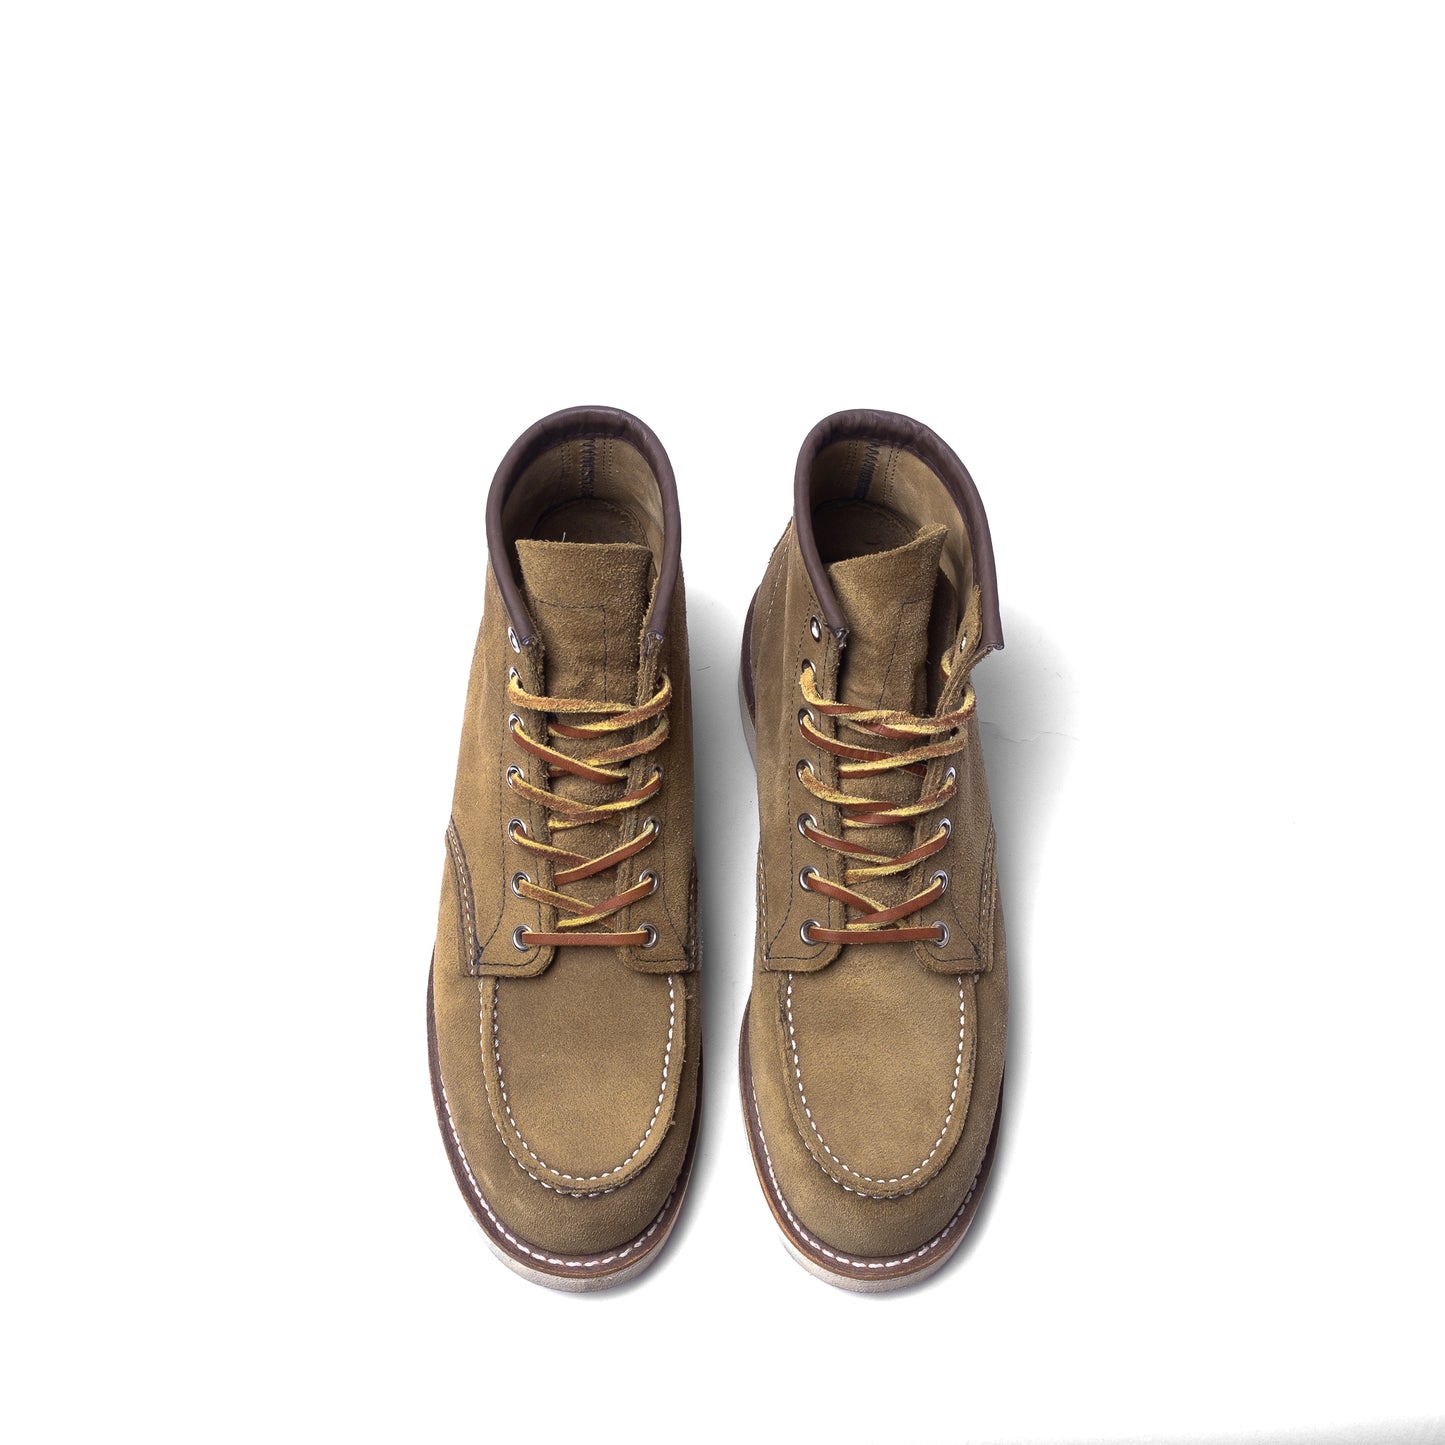 RED WING SHOES - Moc Toe 8881 Olive Mohave